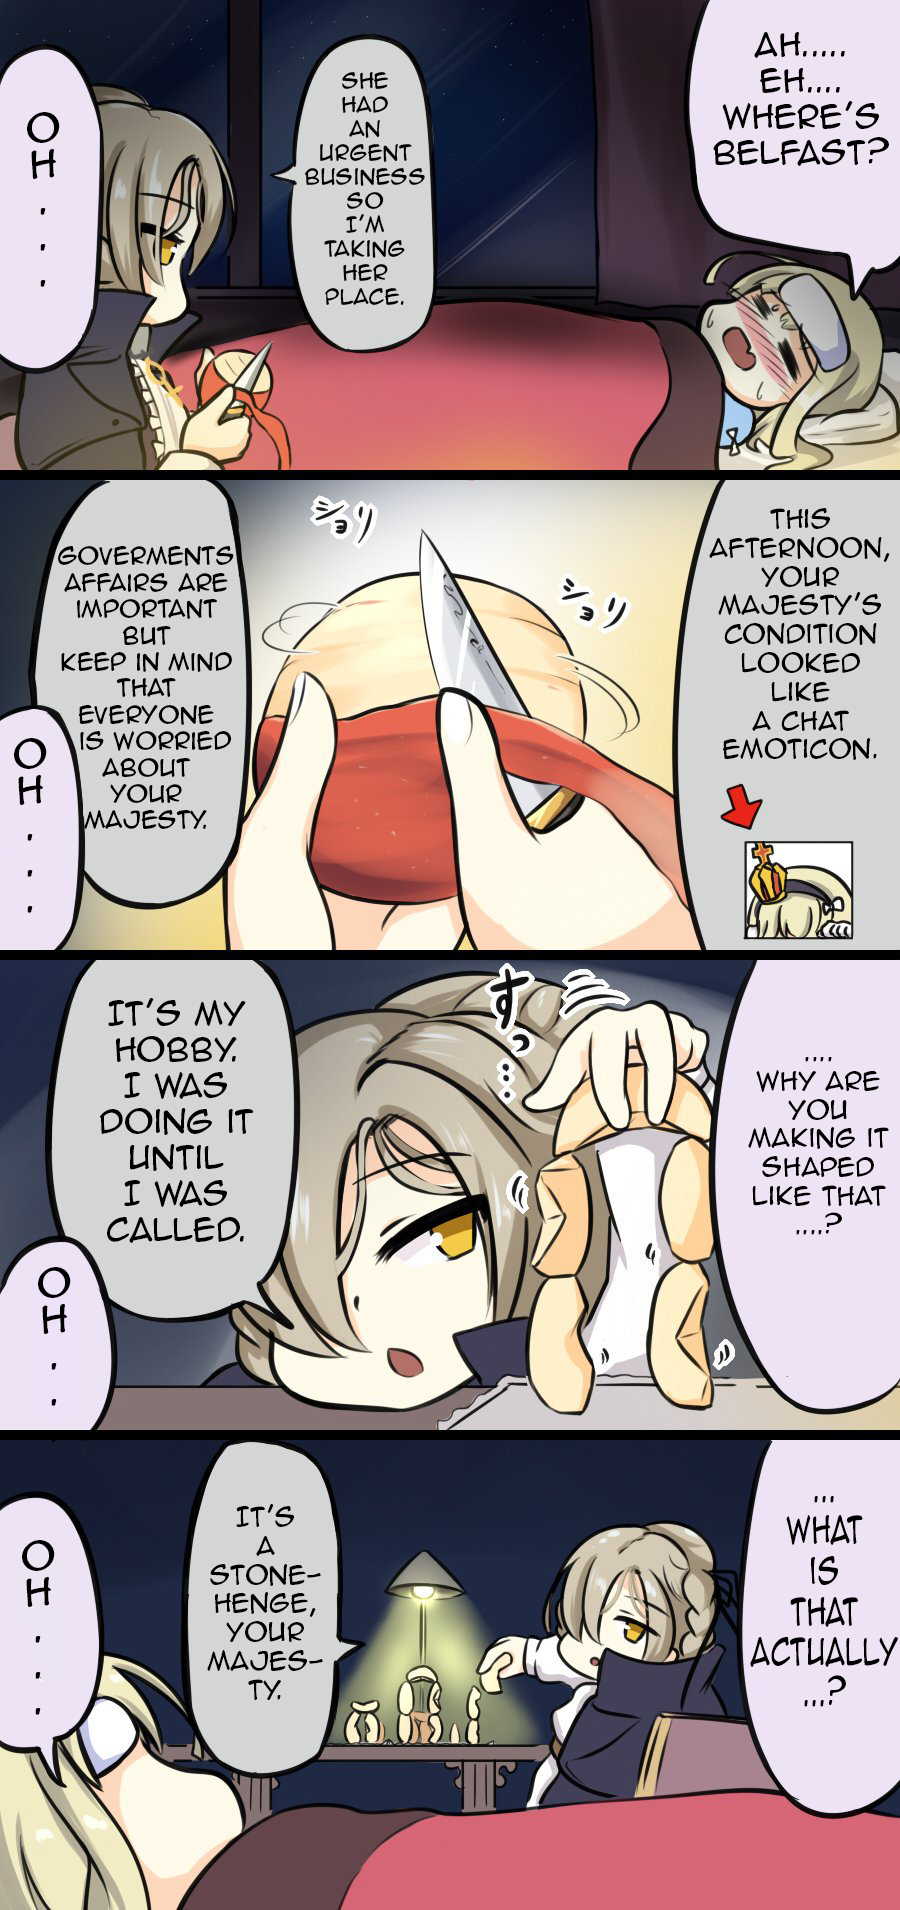 Azur Lane Spare Time (Doujinshi) Ch. 19 Night Full of Curiousity for Her Majesty that Caught Summer Cold